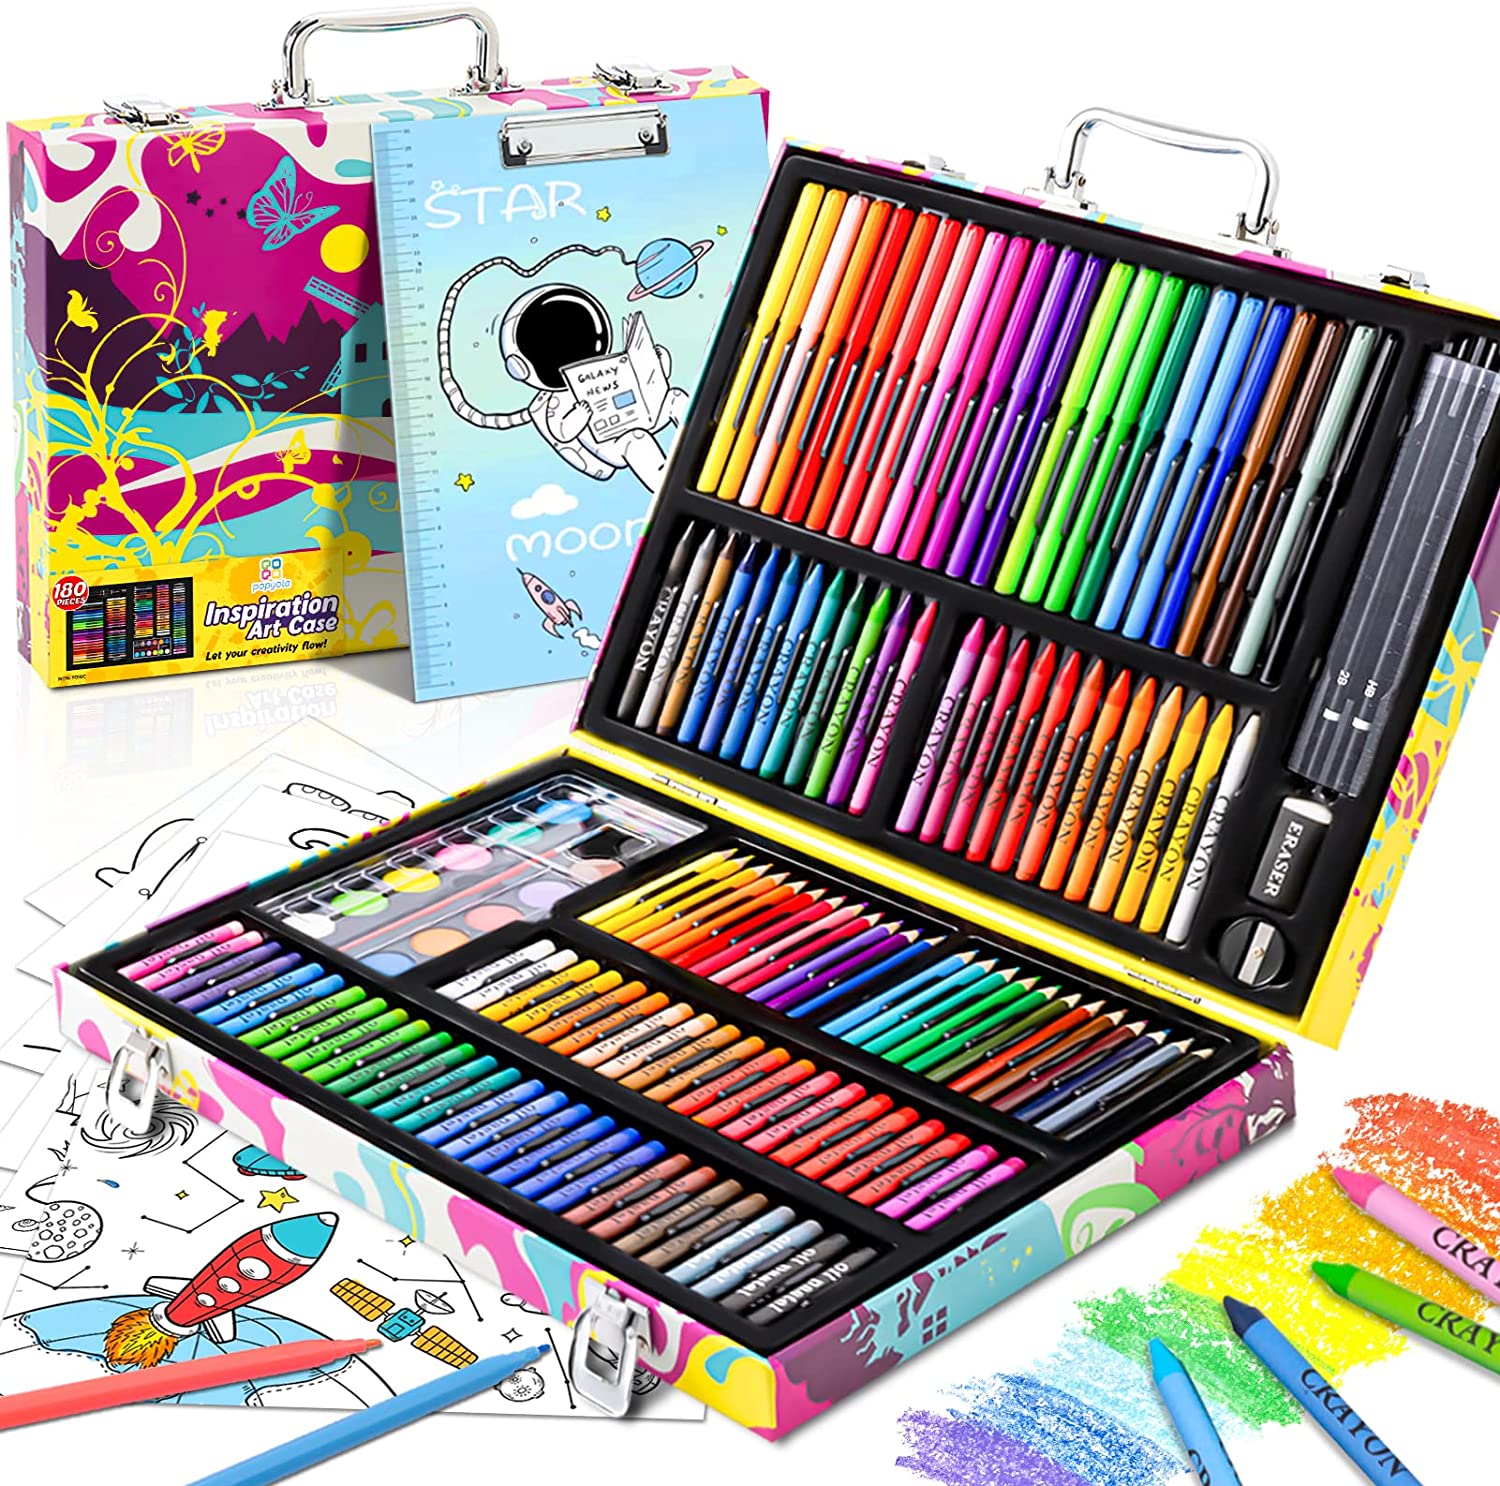  Crayola Masterworks Art Case (200+ Pcs), Art Set For Kids,  Markers, Paints, Colored Pencils, & Crayons, Holiday Gift for Kids, Toys,  4+ : Toys & Games